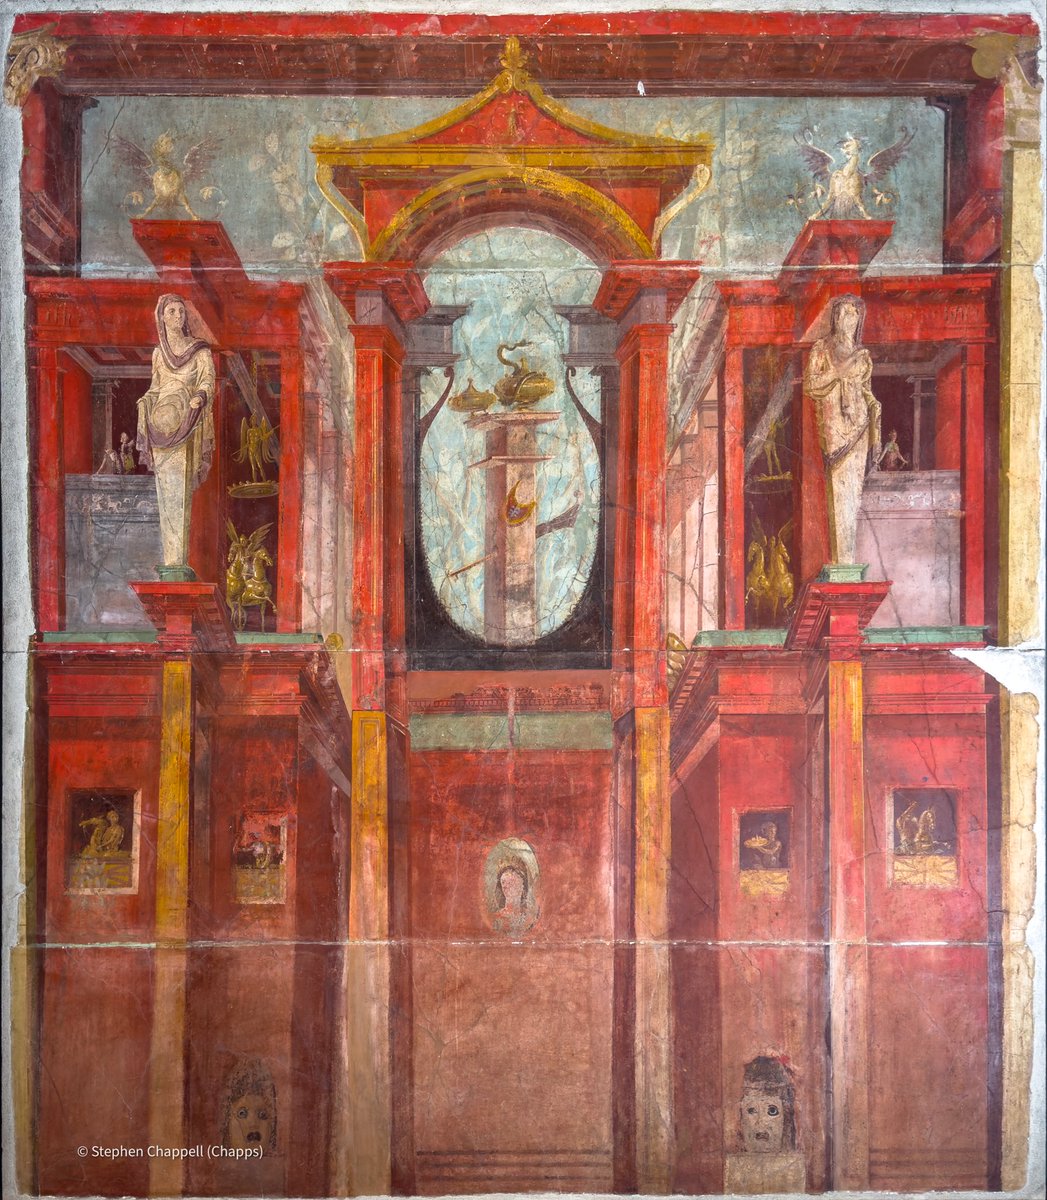 #FrescoFriday This massive fresco with an architectural theme has a complex set of vanishing points which provides perspective. Caryatids, masks, golden statues, griffins, all enhance this fantasy in RED. 😍  1/

2nd half of the 1st c. CE, #Pompeii. (Pompeii Antiquarium)

📸 me